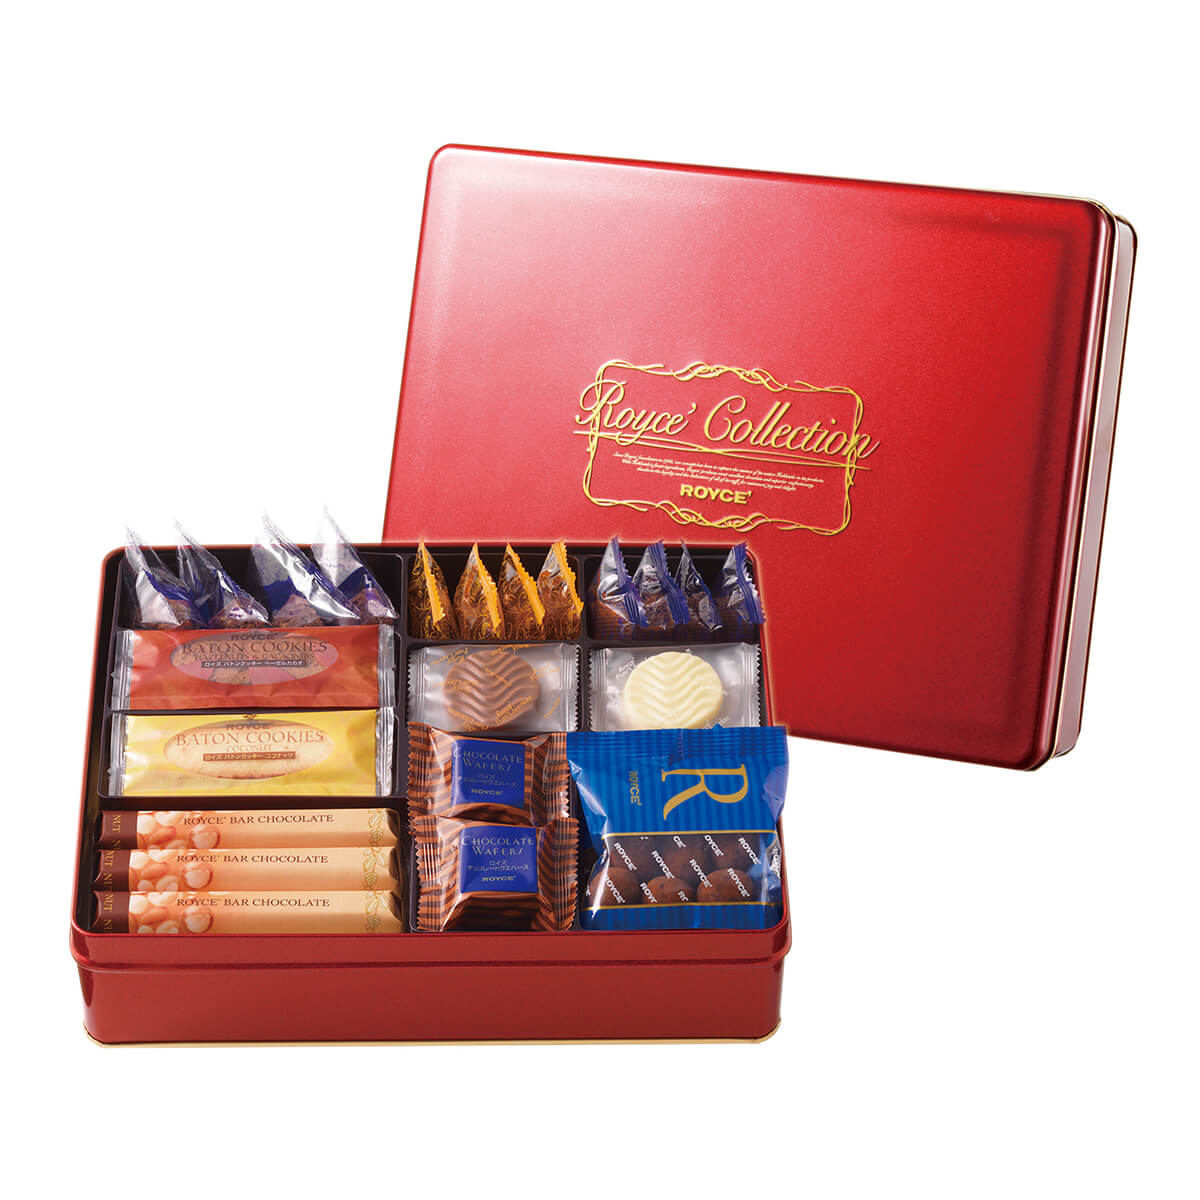 ROYCE' Chocolate - Image shows a box-shaped red can on the middle right with text saying ROYCE' Collection ROYCE'. Lower left part has open red box with different kinds of wrapped chocolates.